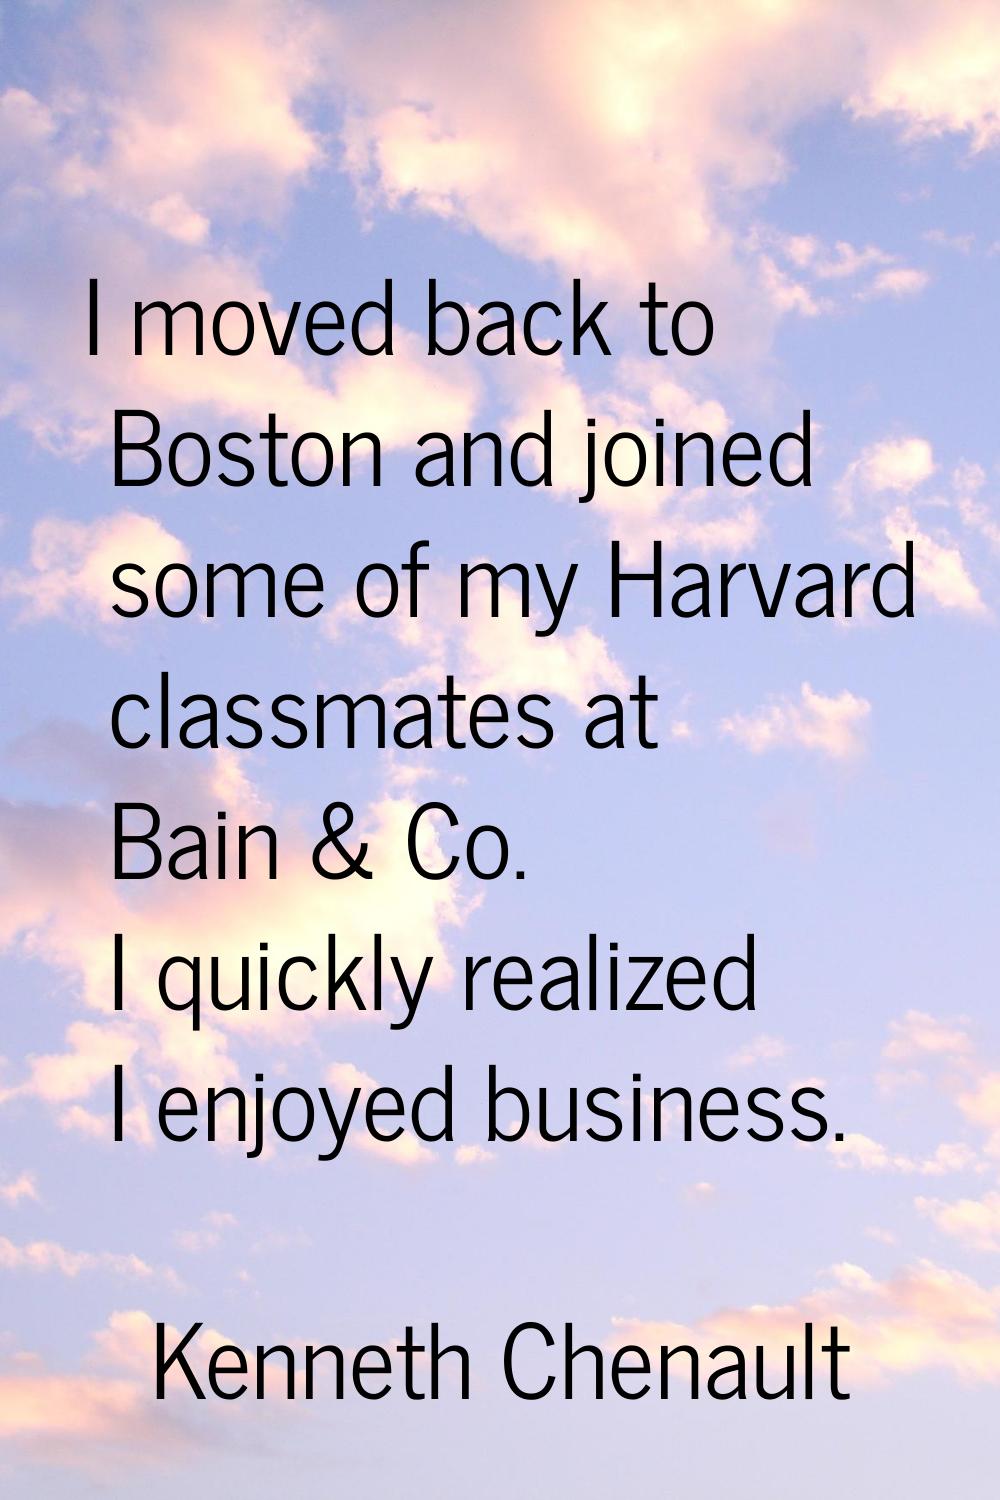 I moved back to Boston and joined some of my Harvard classmates at Bain & Co. I quickly realized I 